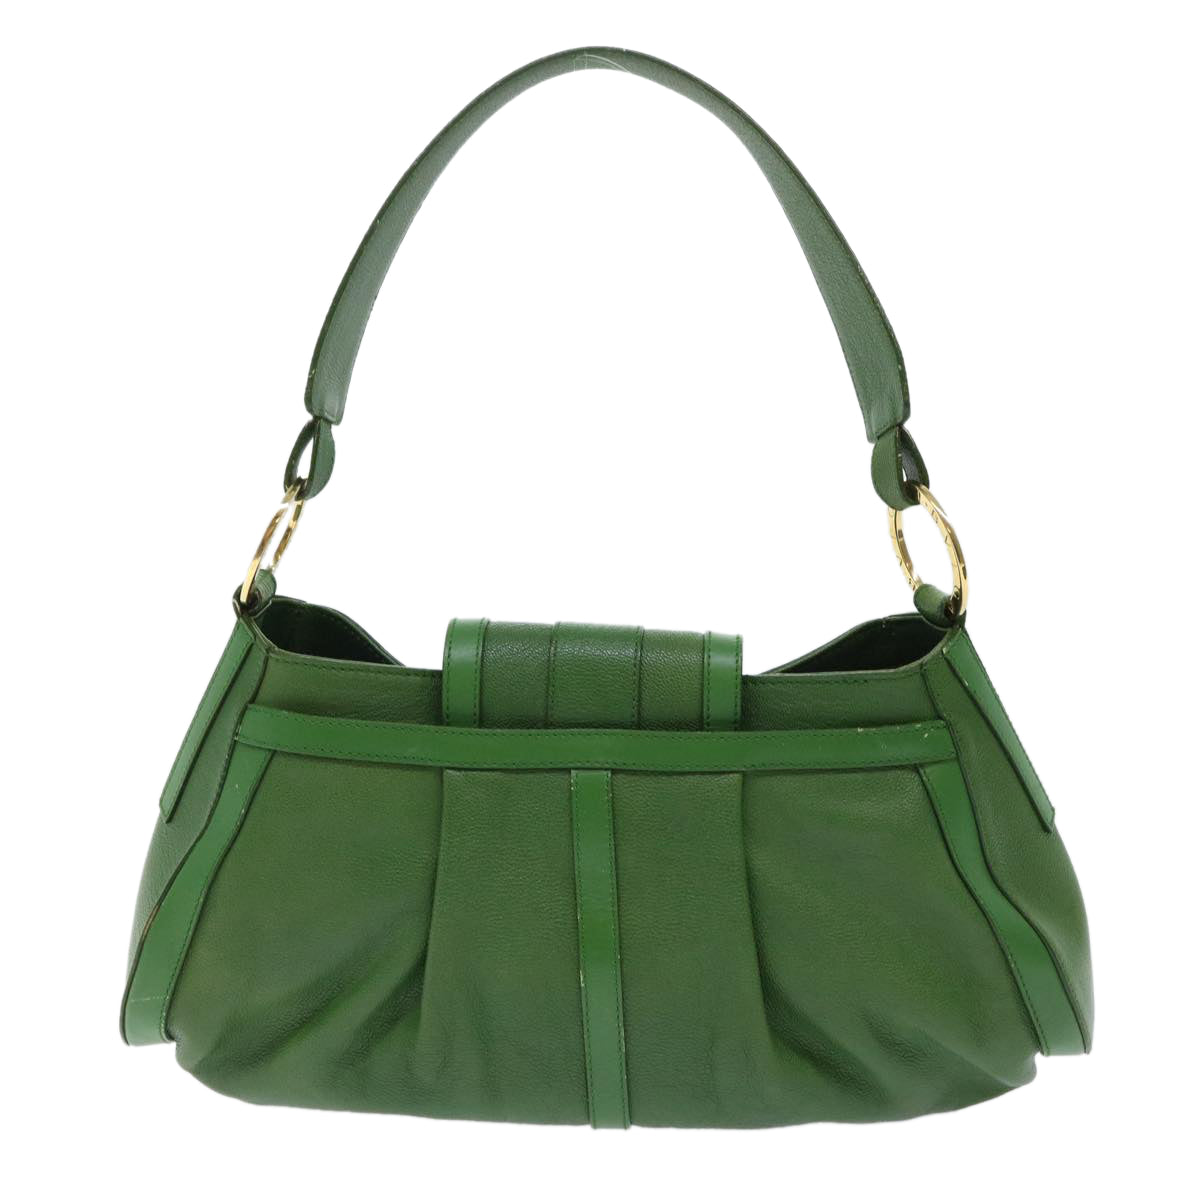 BVLGARI Shoulder Bag Leather Green Auth ep1308 - 0